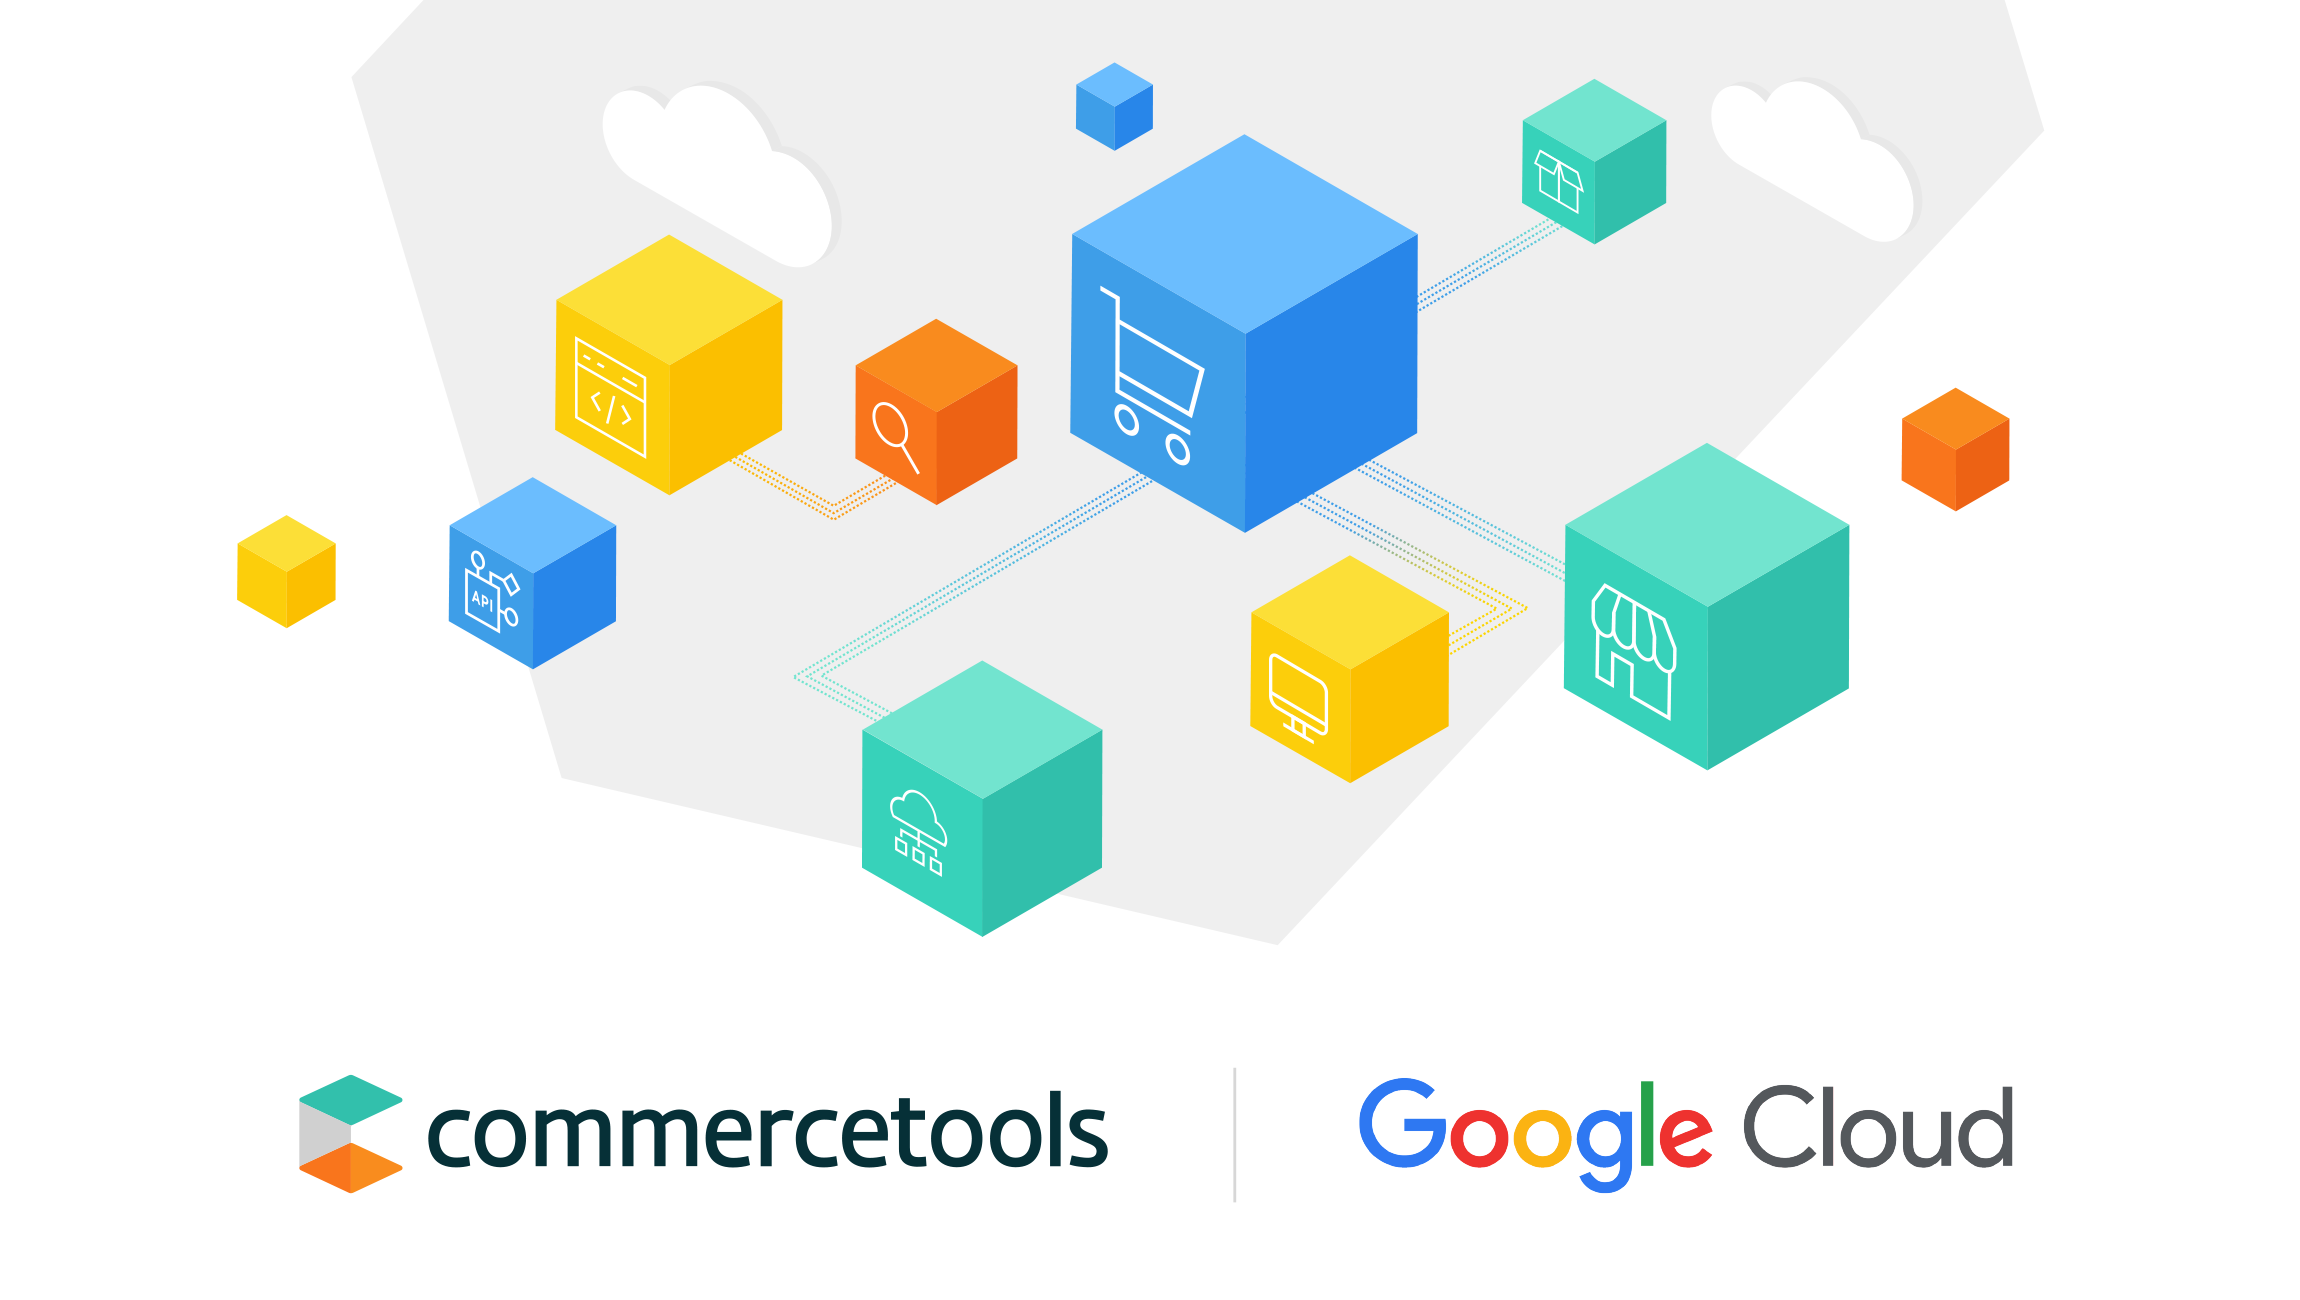 The power of Google Cloud and commercetools for modern digital commerce